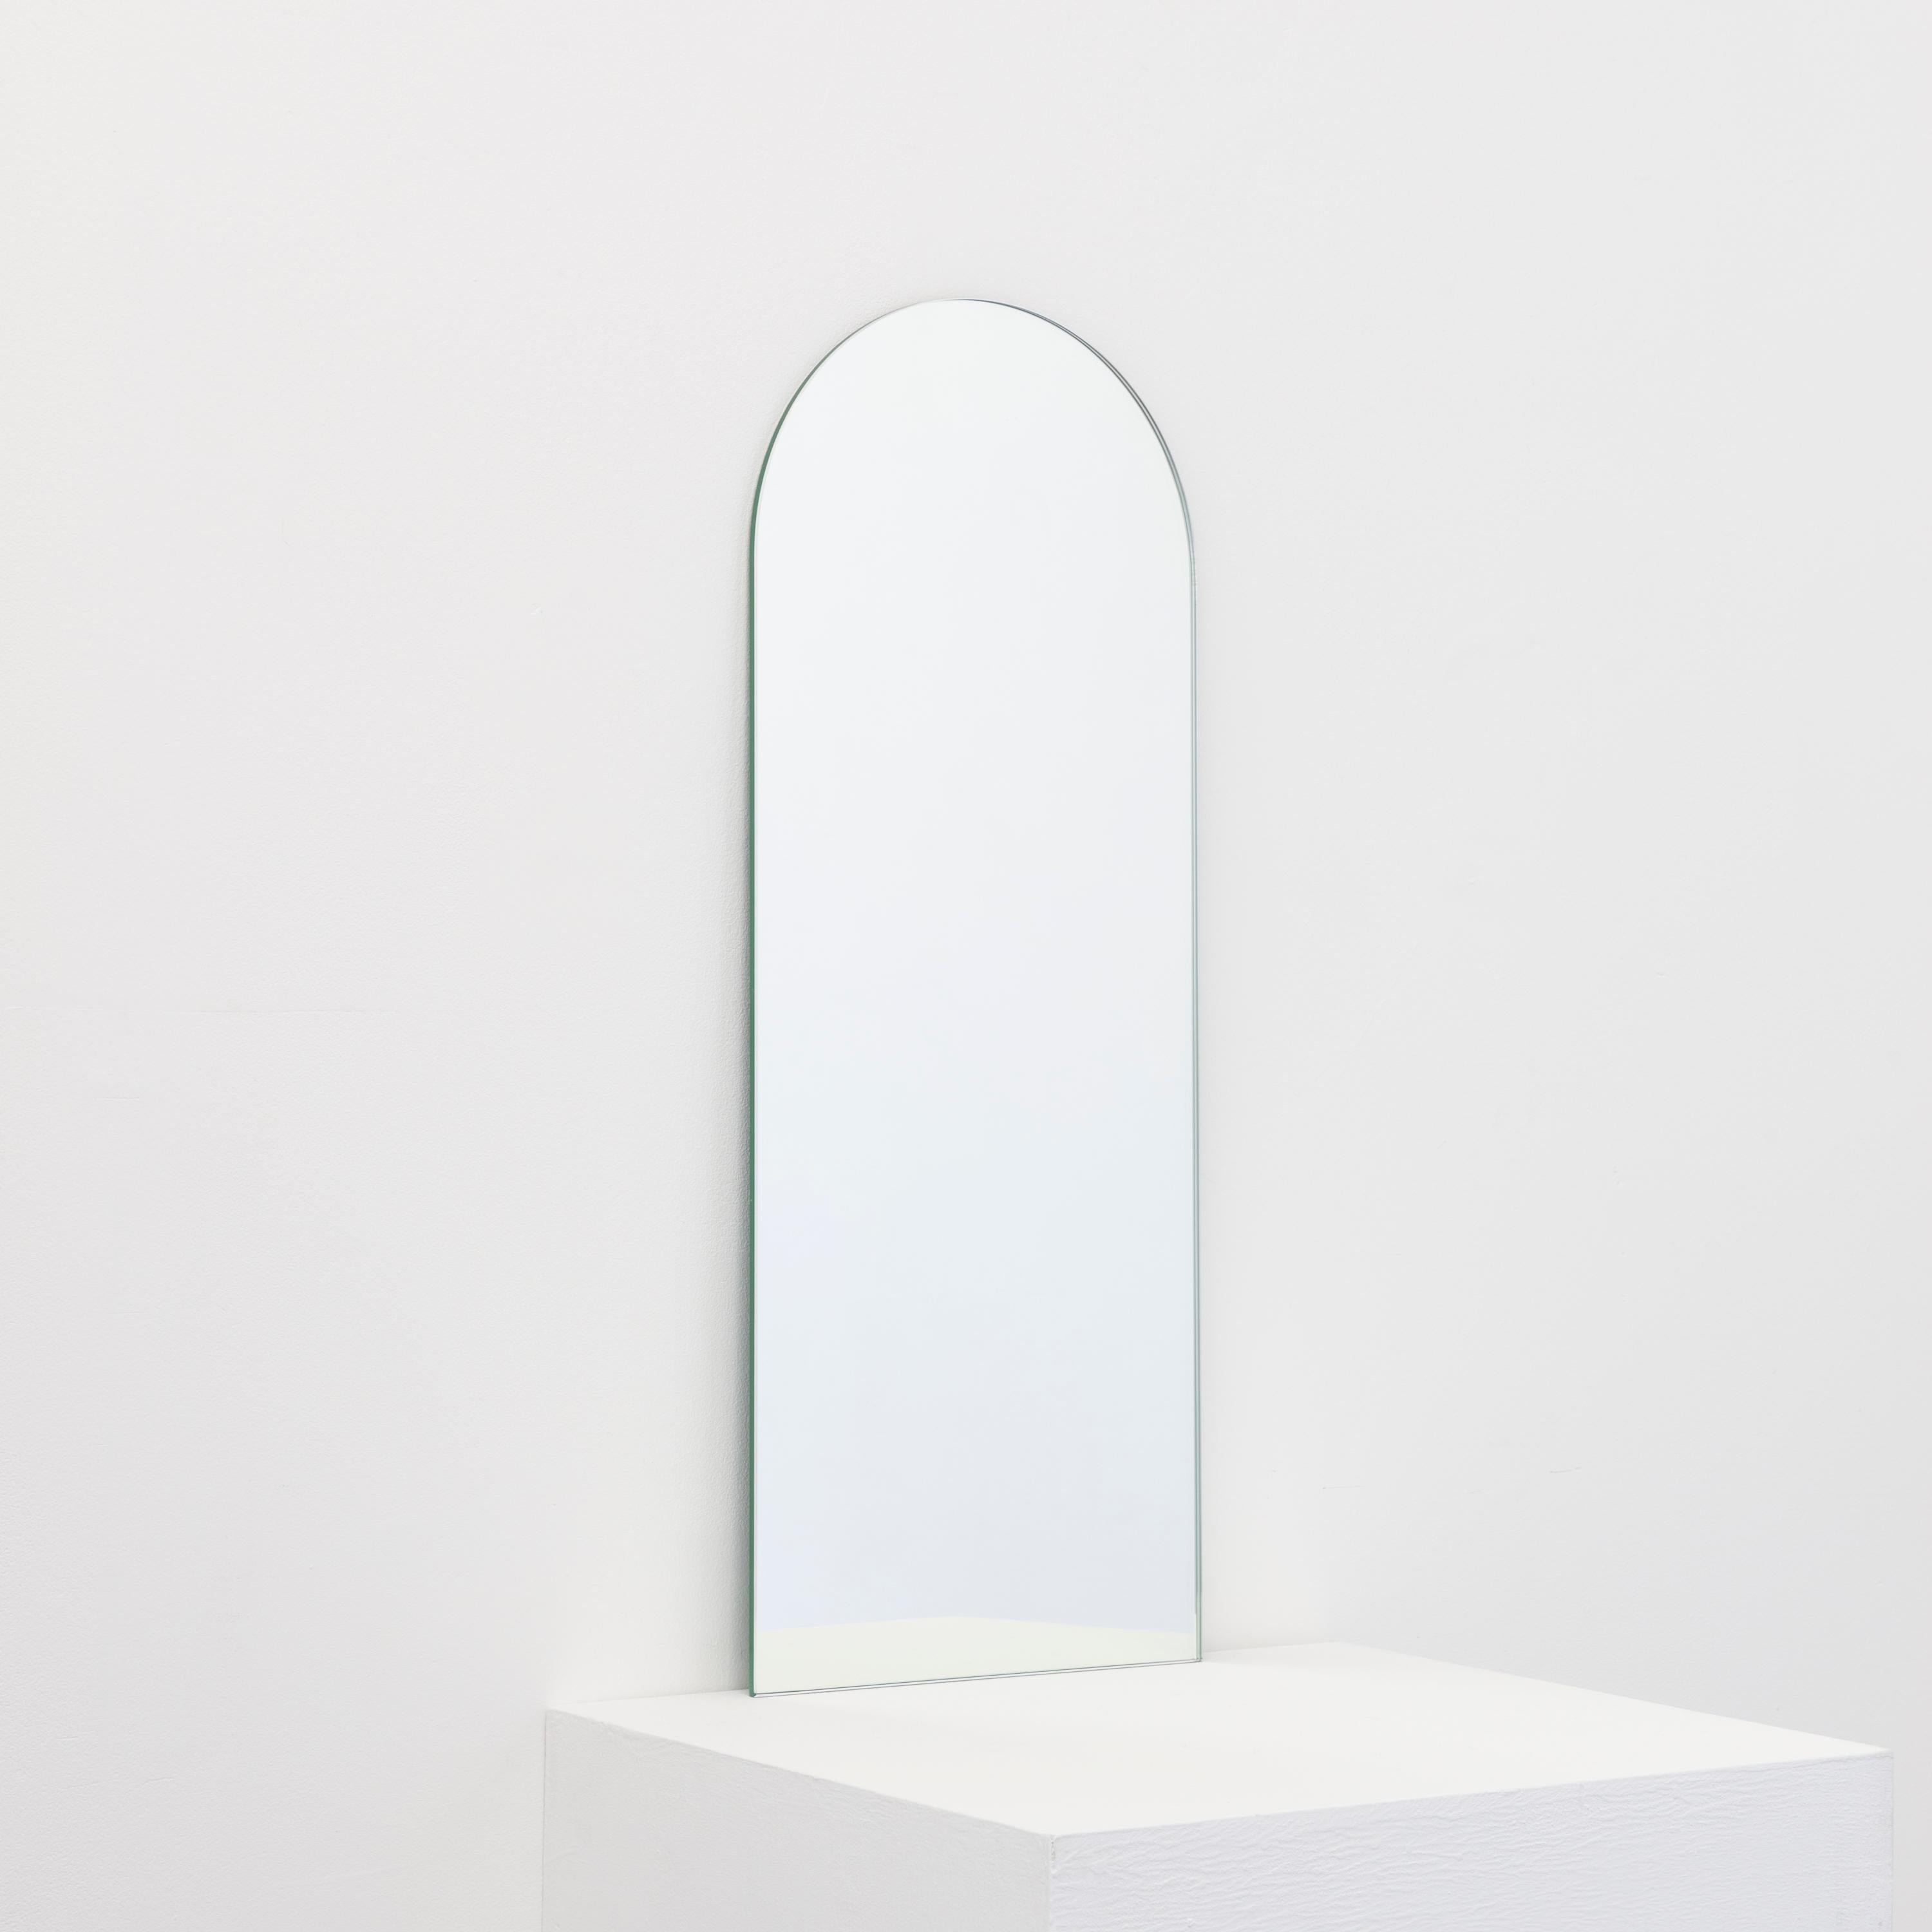 Minimalist Arcus™ arch shaped frameless mirror with a floating effect. Quality design that ensures the mirror sits perfectly parallel to the wall. Designed and made in London, UK.

Fitted with professional plates not visible once installed for an